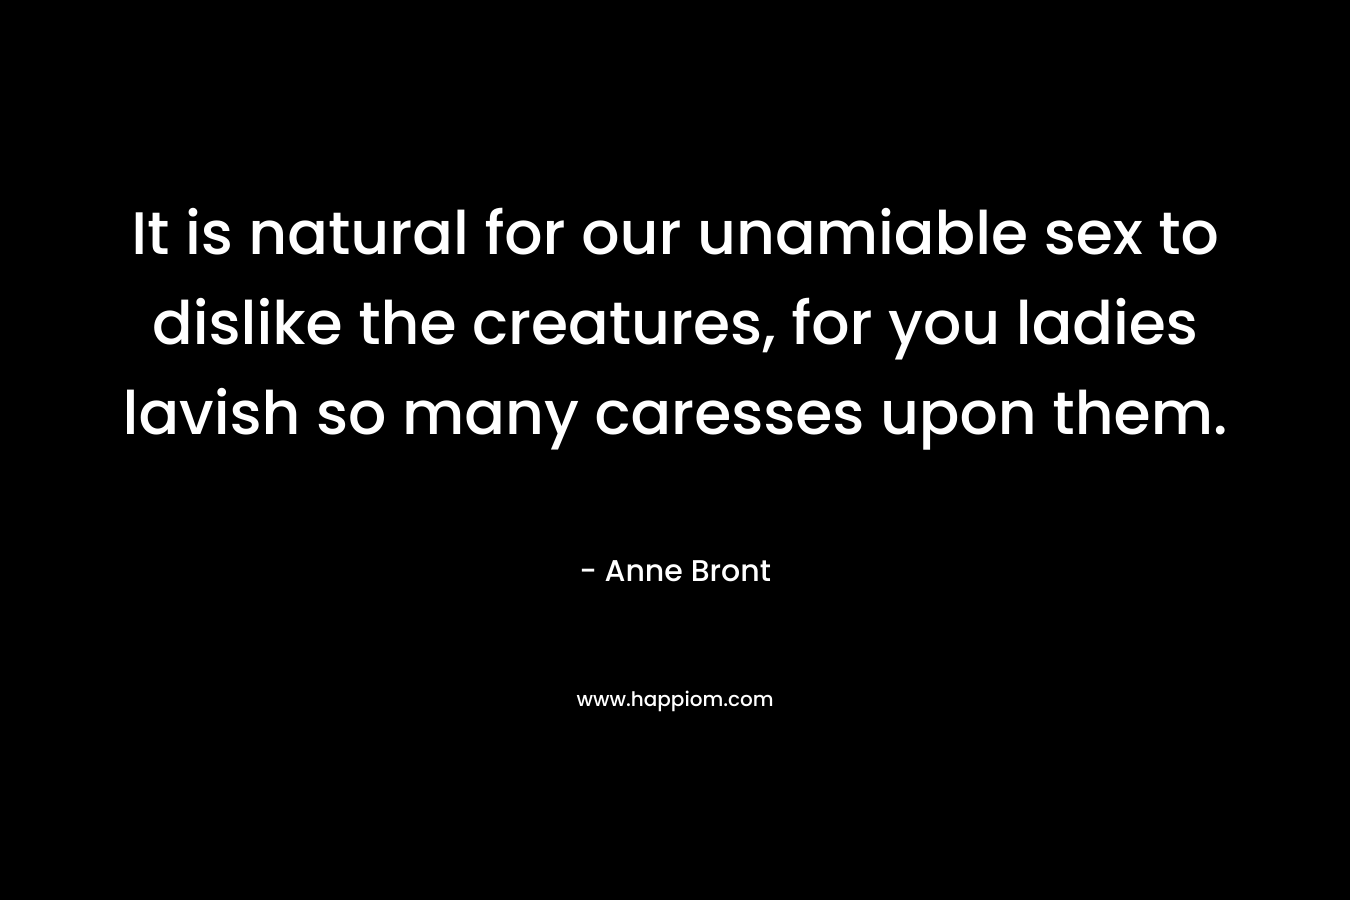 It is natural for our unamiable sex to dislike the creatures, for you ladies lavish so many caresses upon them. – Anne Bront